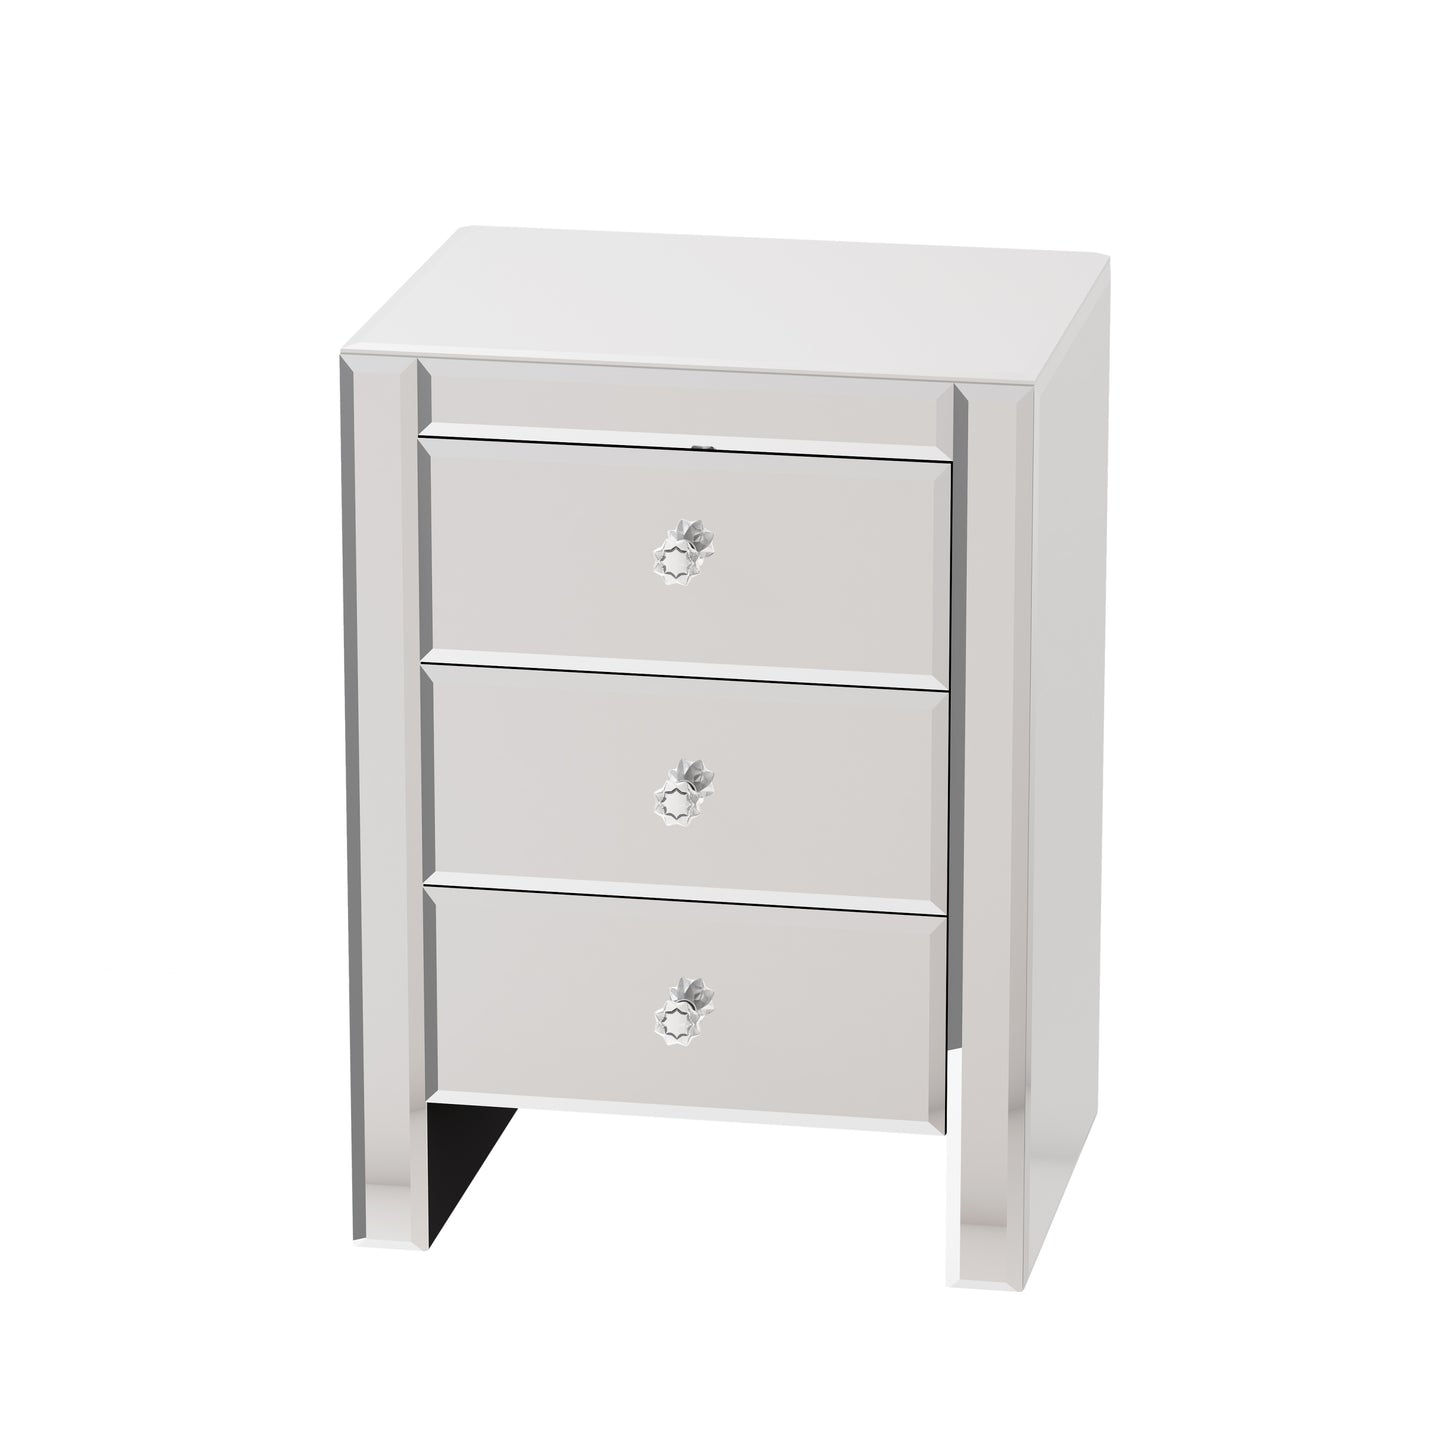 Elegance Reflections 3-Drawer Mirrored Accent Chest